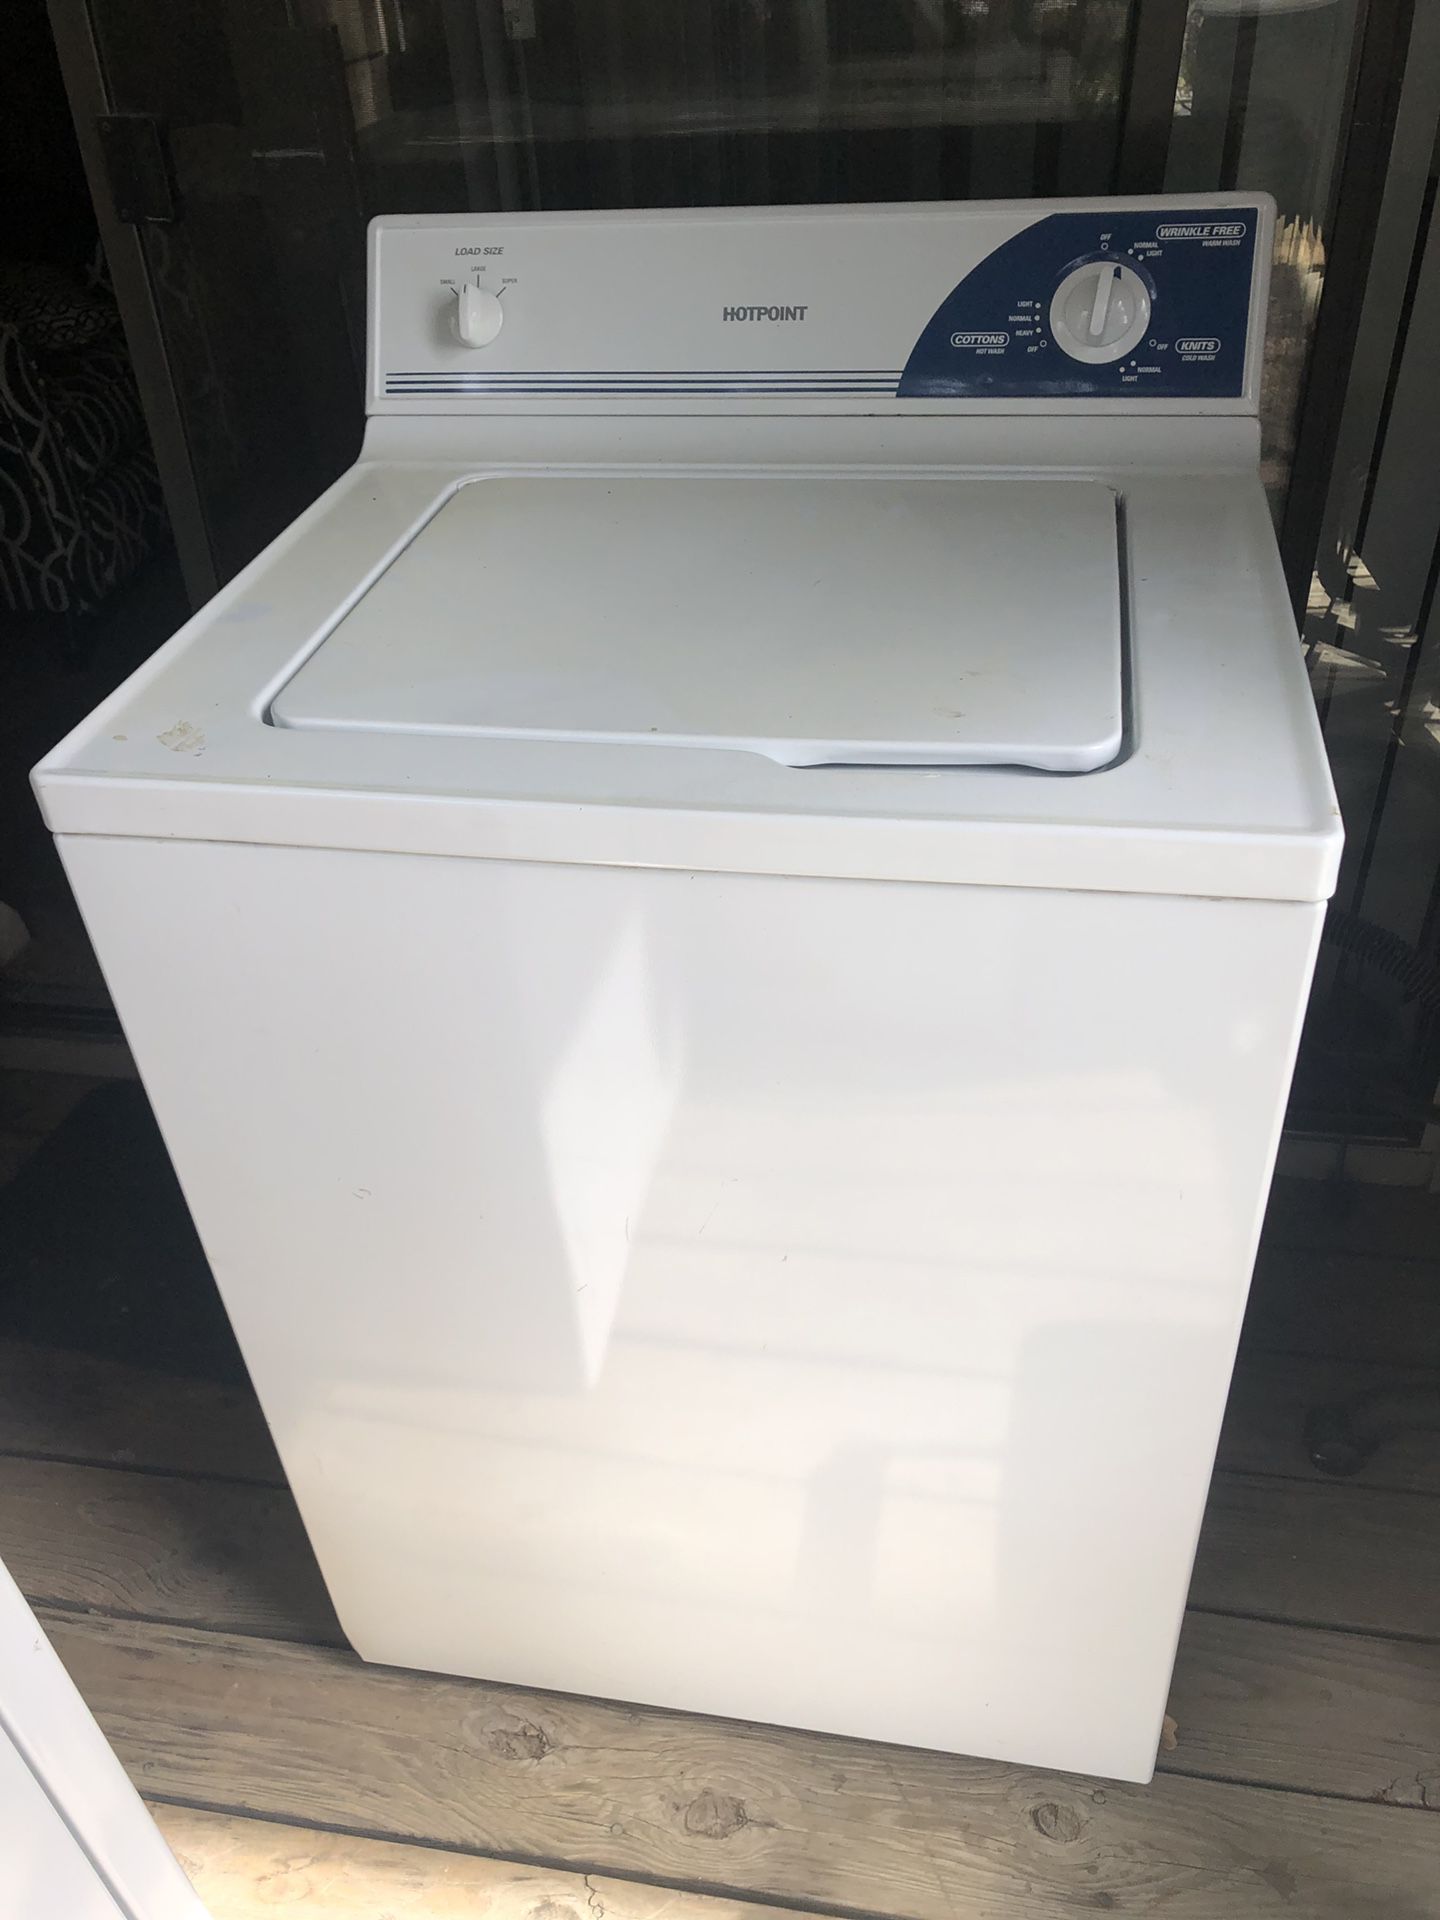 Hotpoint Washer and whirlpool dryer